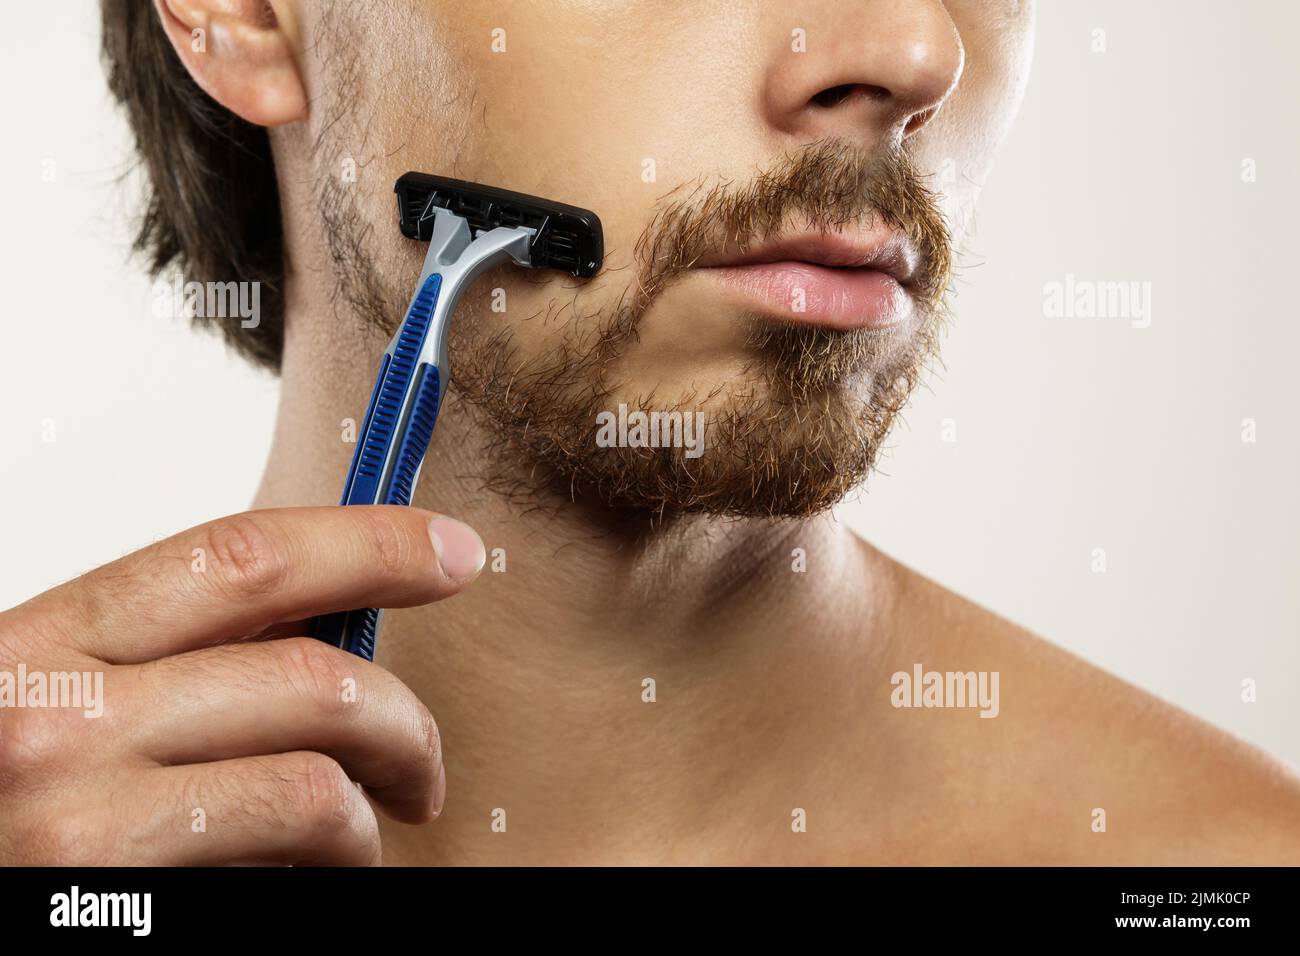 Man with unkempt beard before a shaving routine Stock Photo